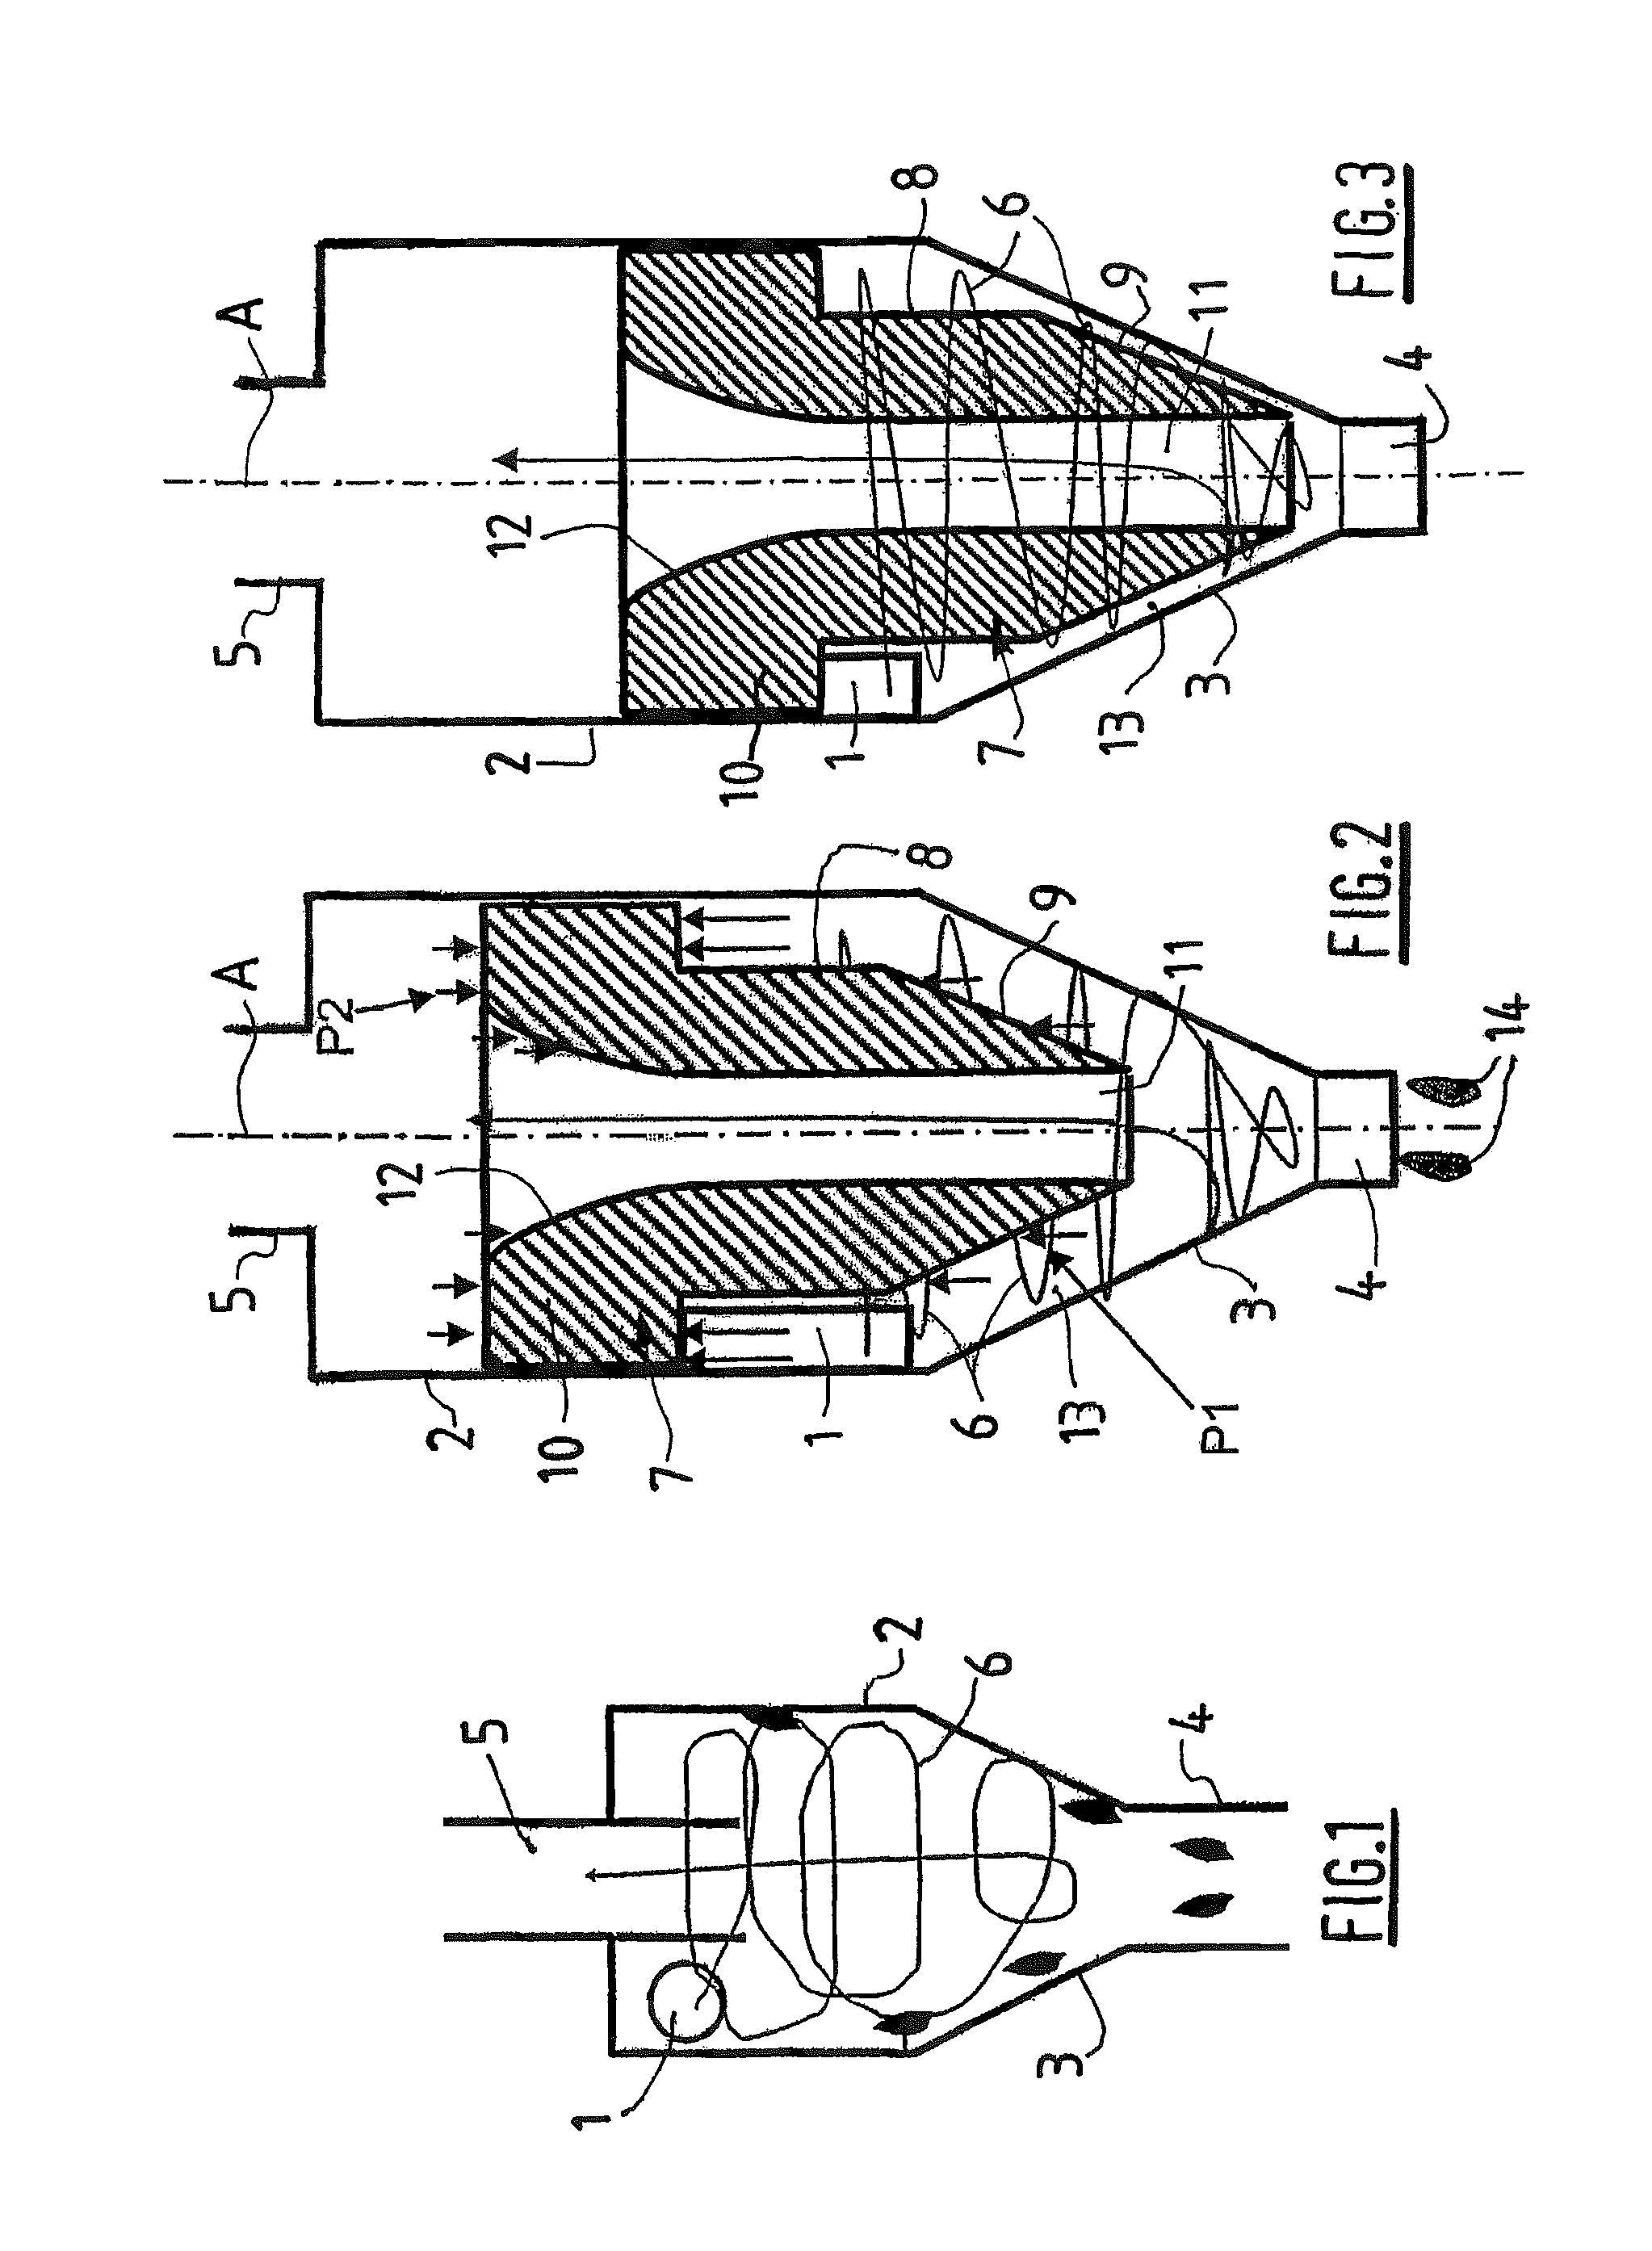 Cyclone separator device for gas-oil separation